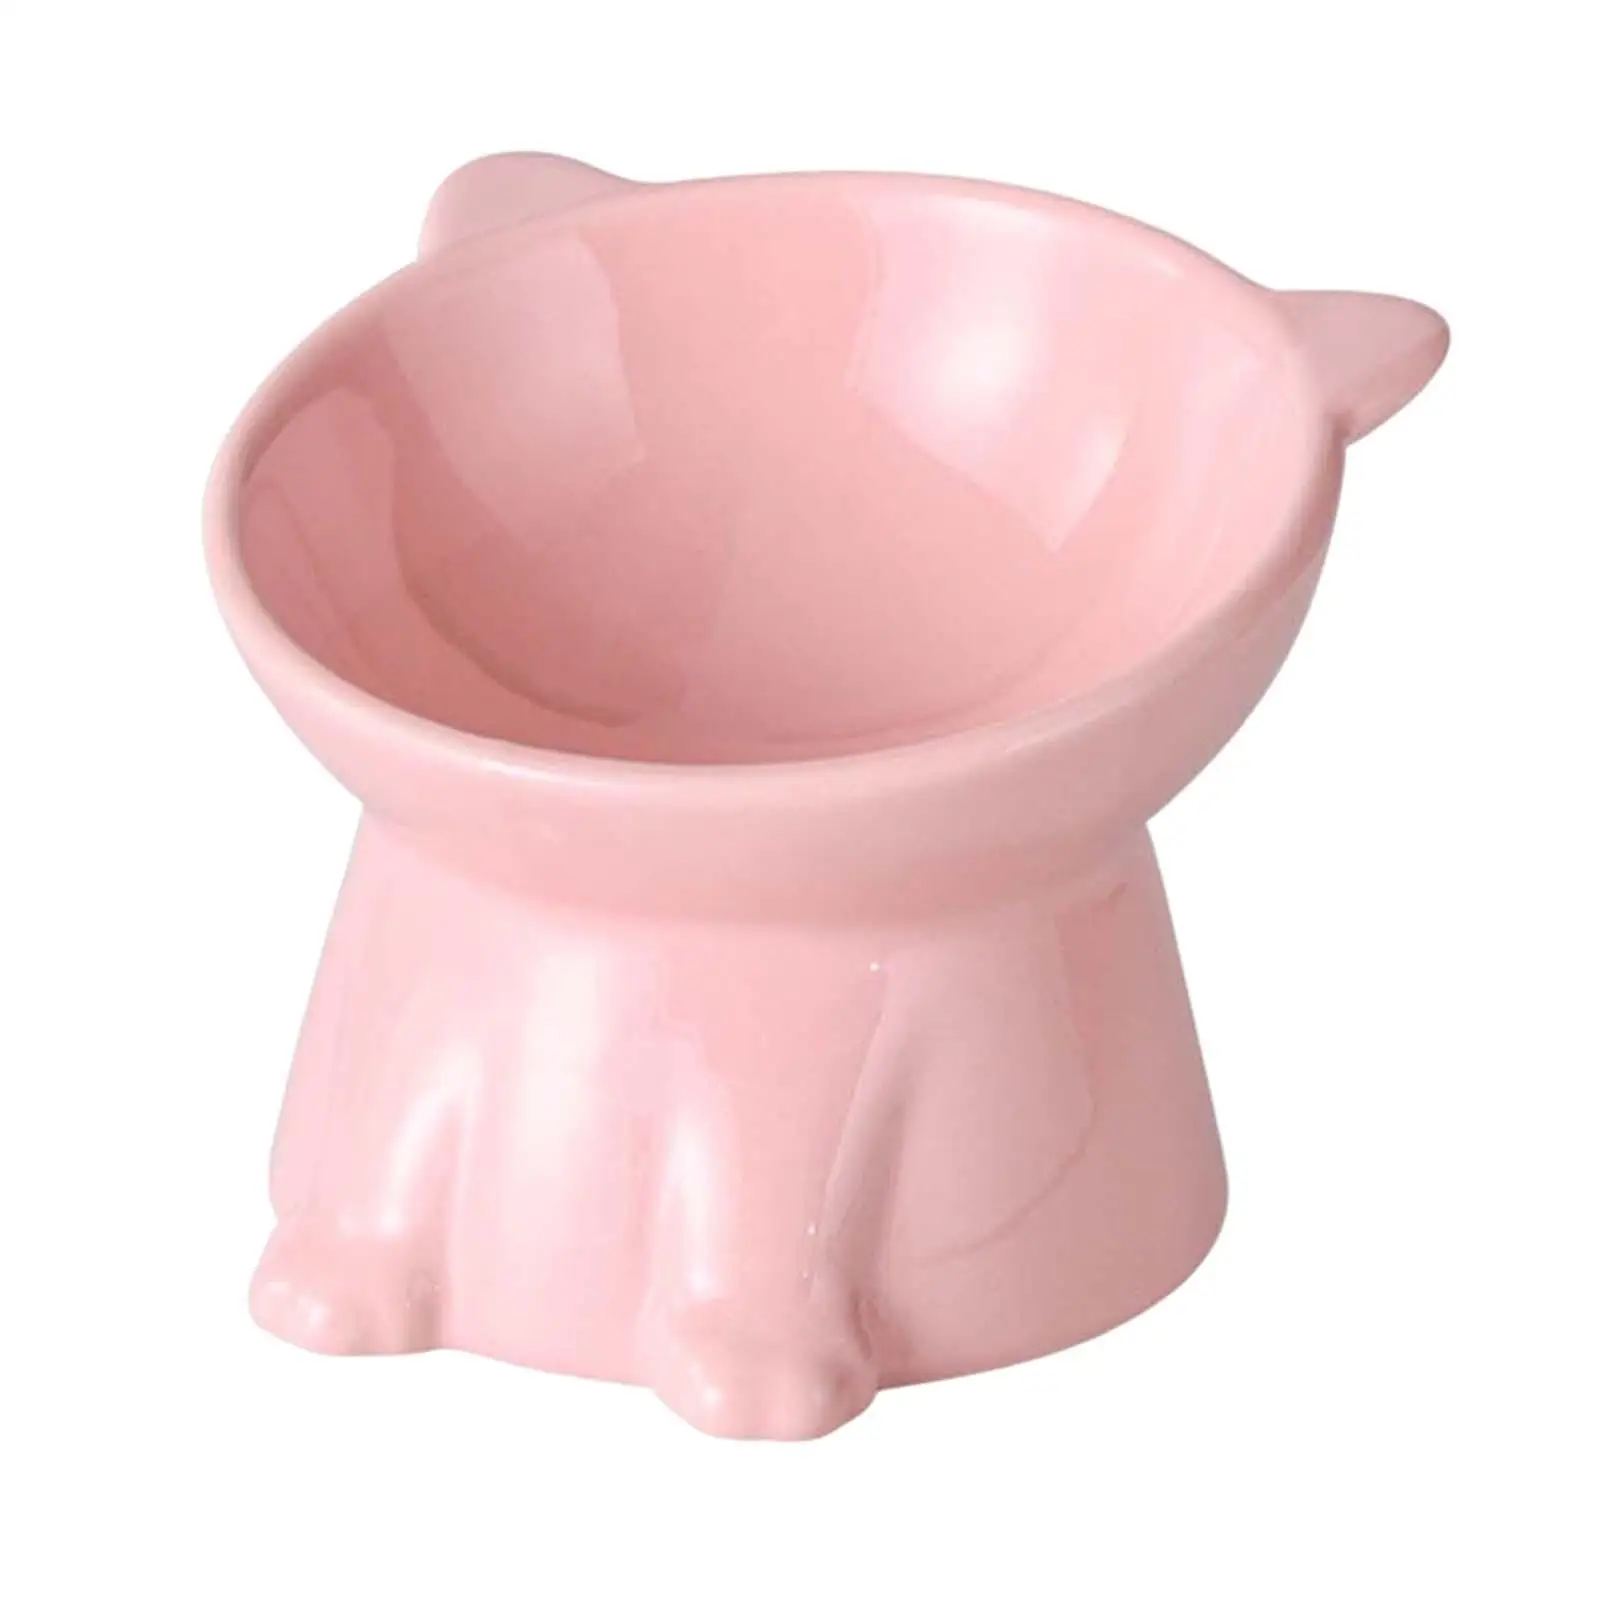 Raised Cat Bowl Pet Feeding Dish Kitty Drinking Bowl Tilted Elevated Cat Bowl for Small Medium Dogs Faced Cat Supplies